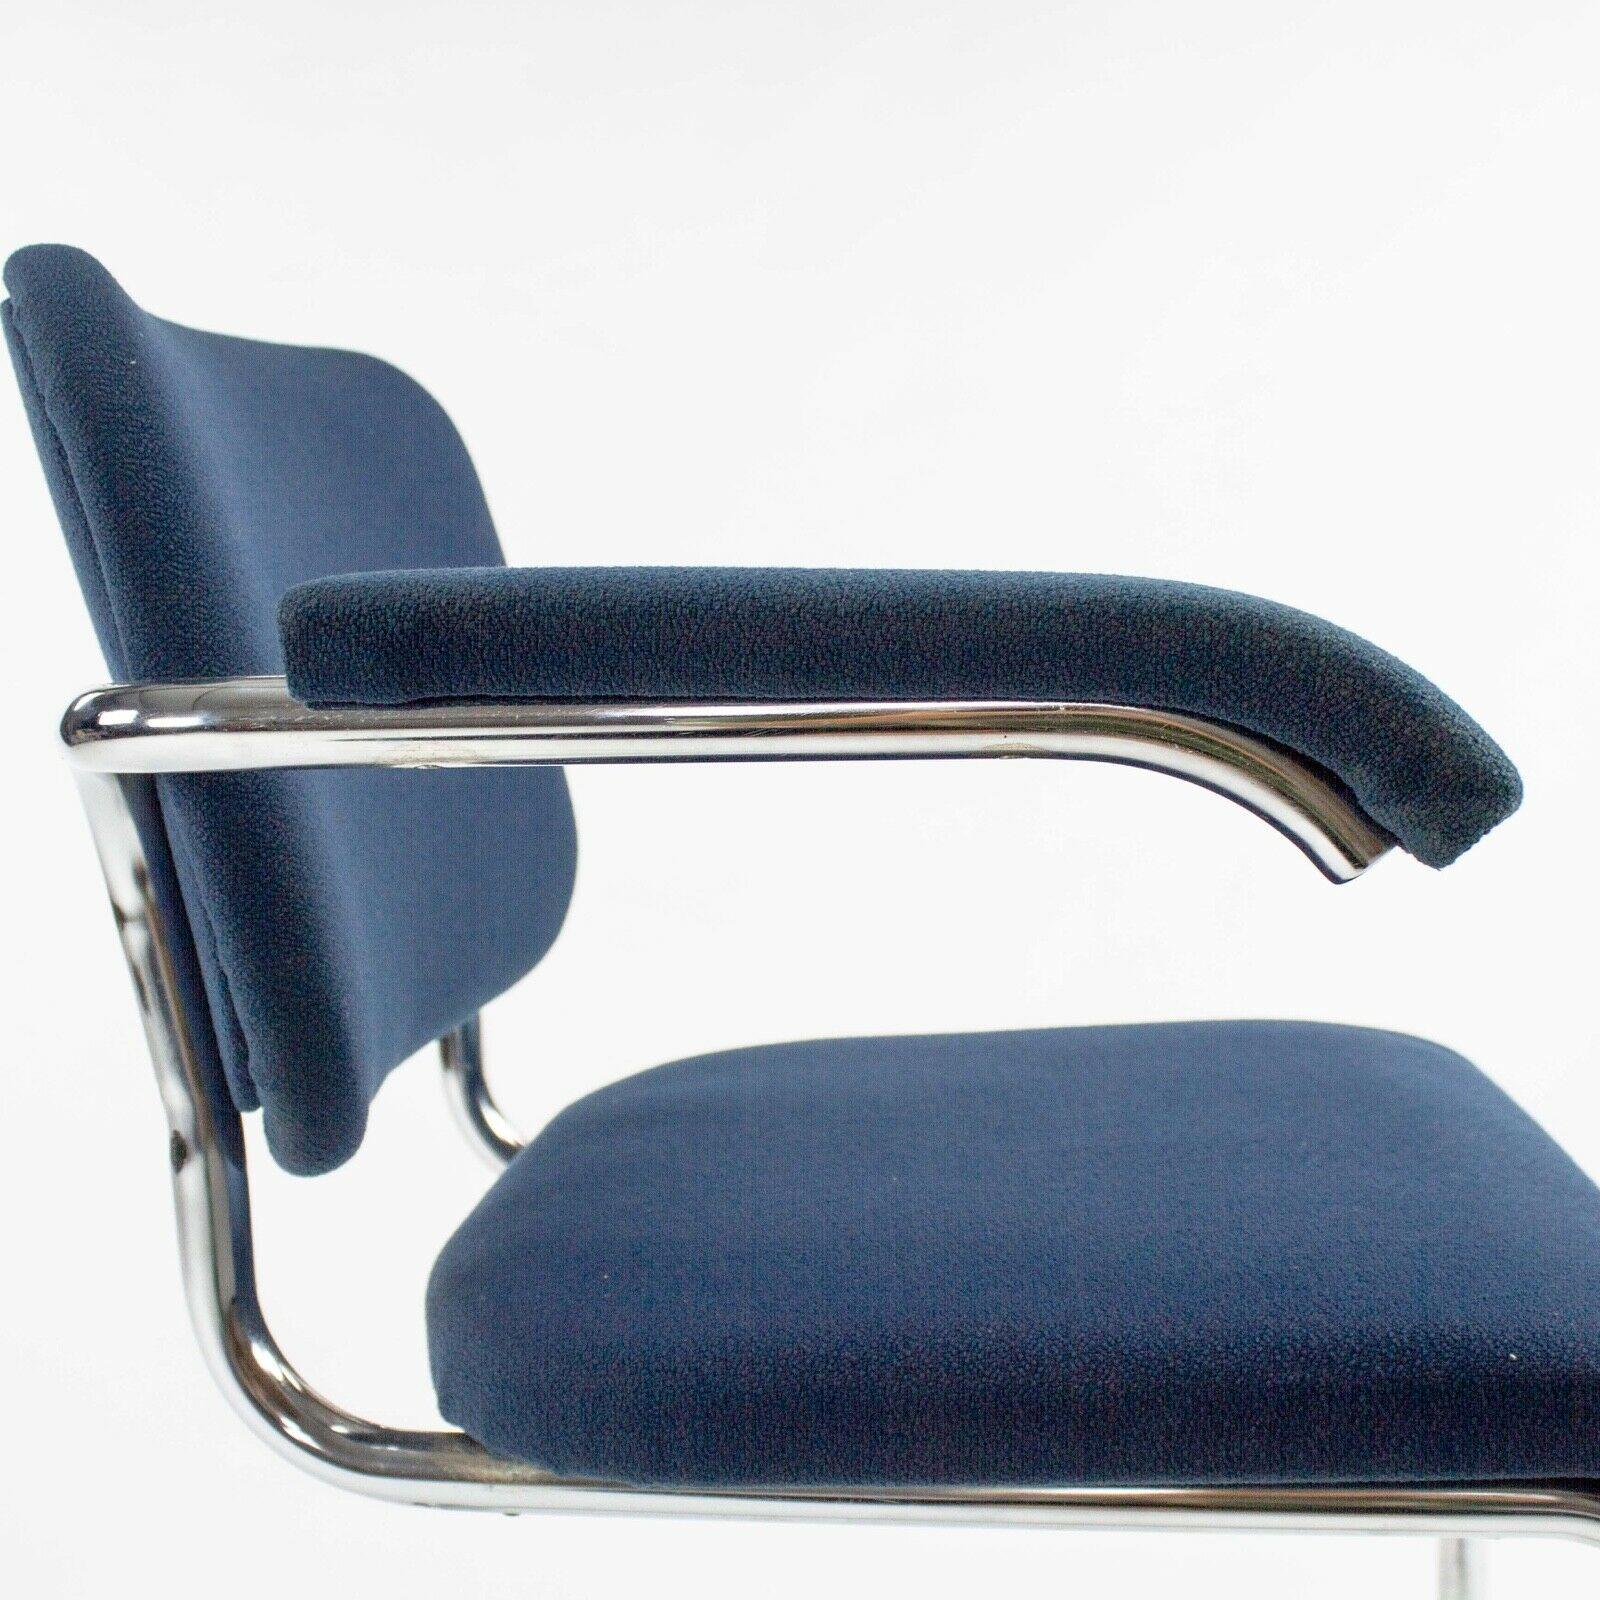 1970s Pair of Marcel Breuer for Knoll Cesca Upholstered Armchairs in Blue Fabric For Sale 5